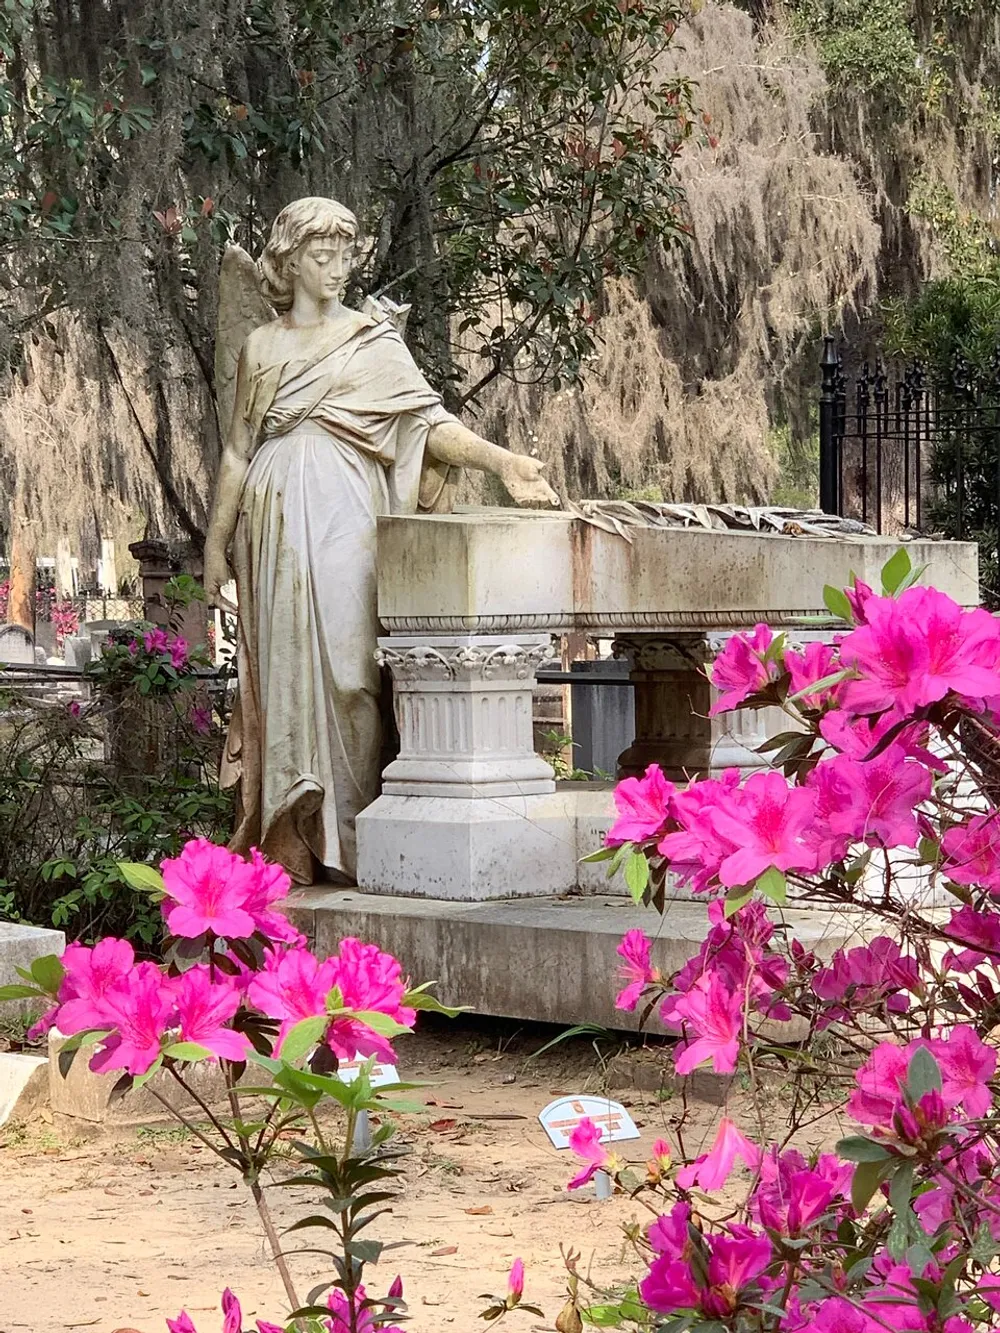 A statue of an angel leaning on a pedestal is framed by vibrant pink flowers in a serene garden setting with Spanish moss draped in the background